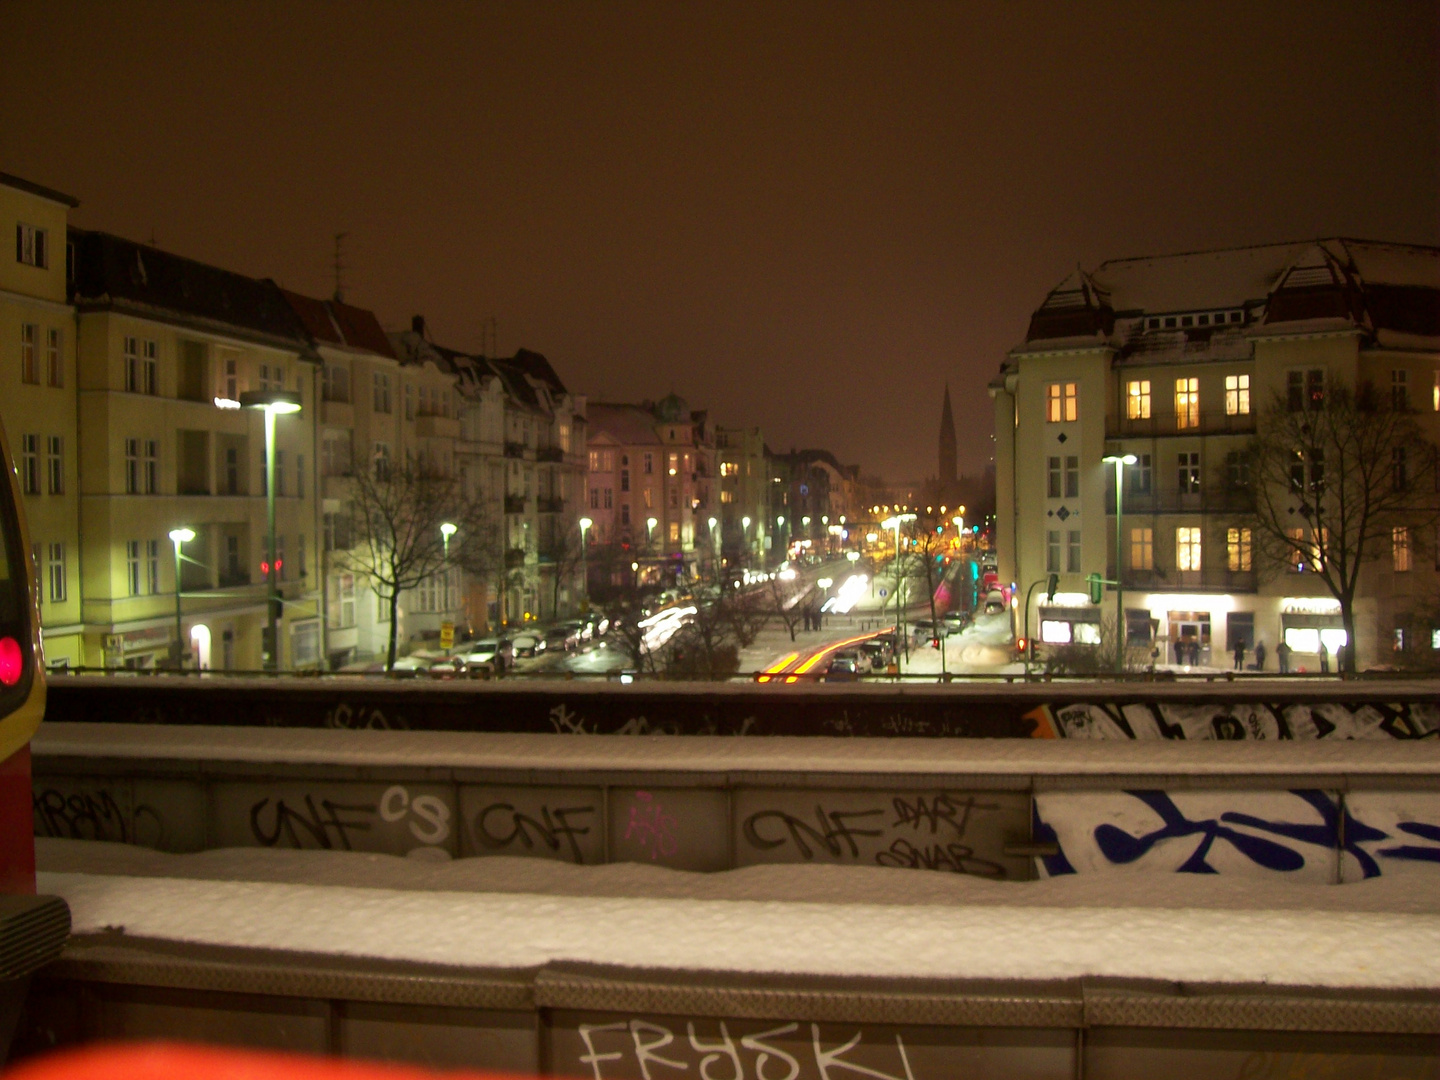 Urban Berlin - Blindet by the lights.